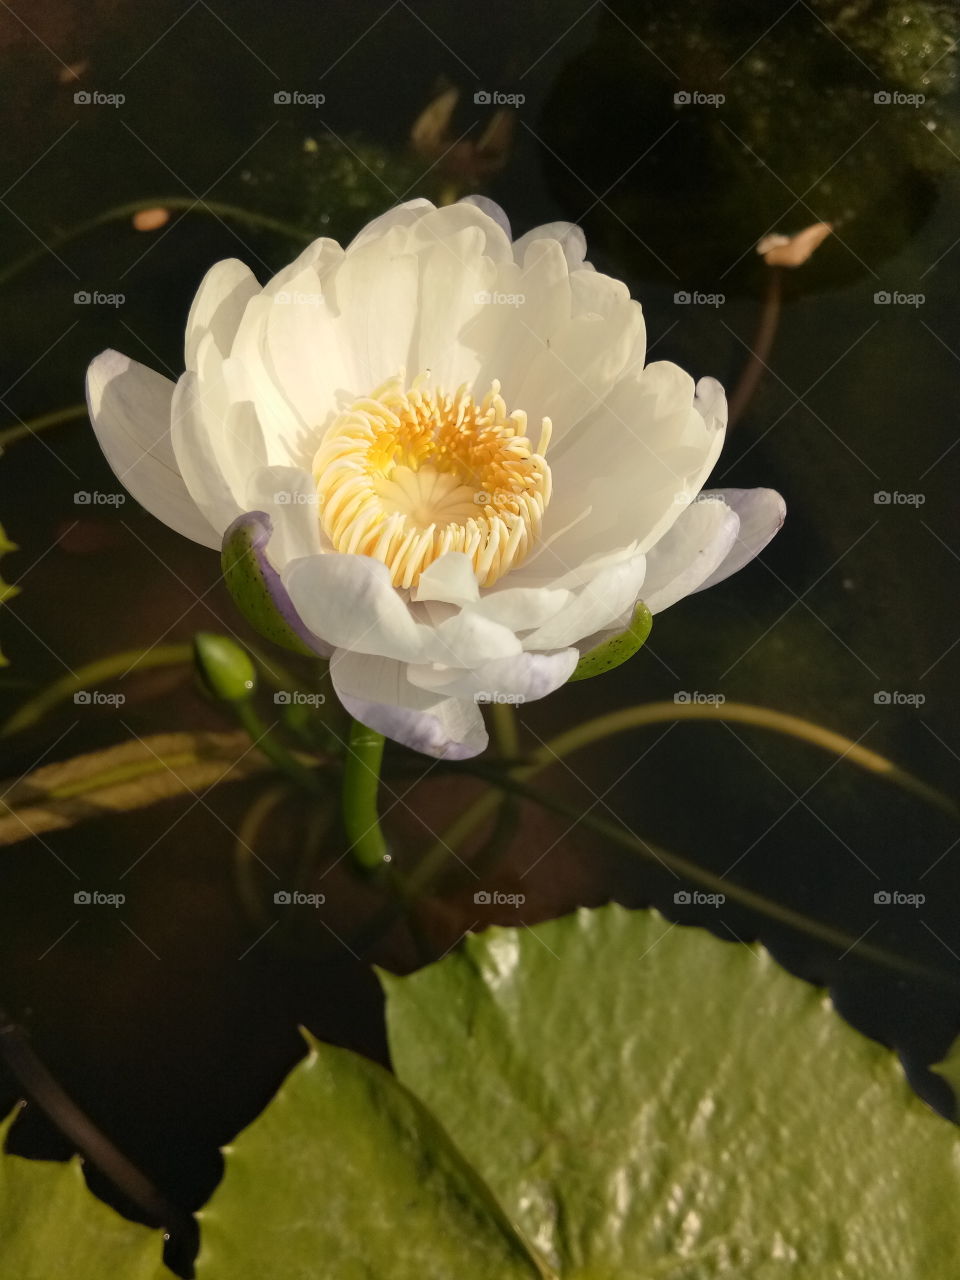 Lotus
beautiful 
flower
flora
lily
green
nature
thailand